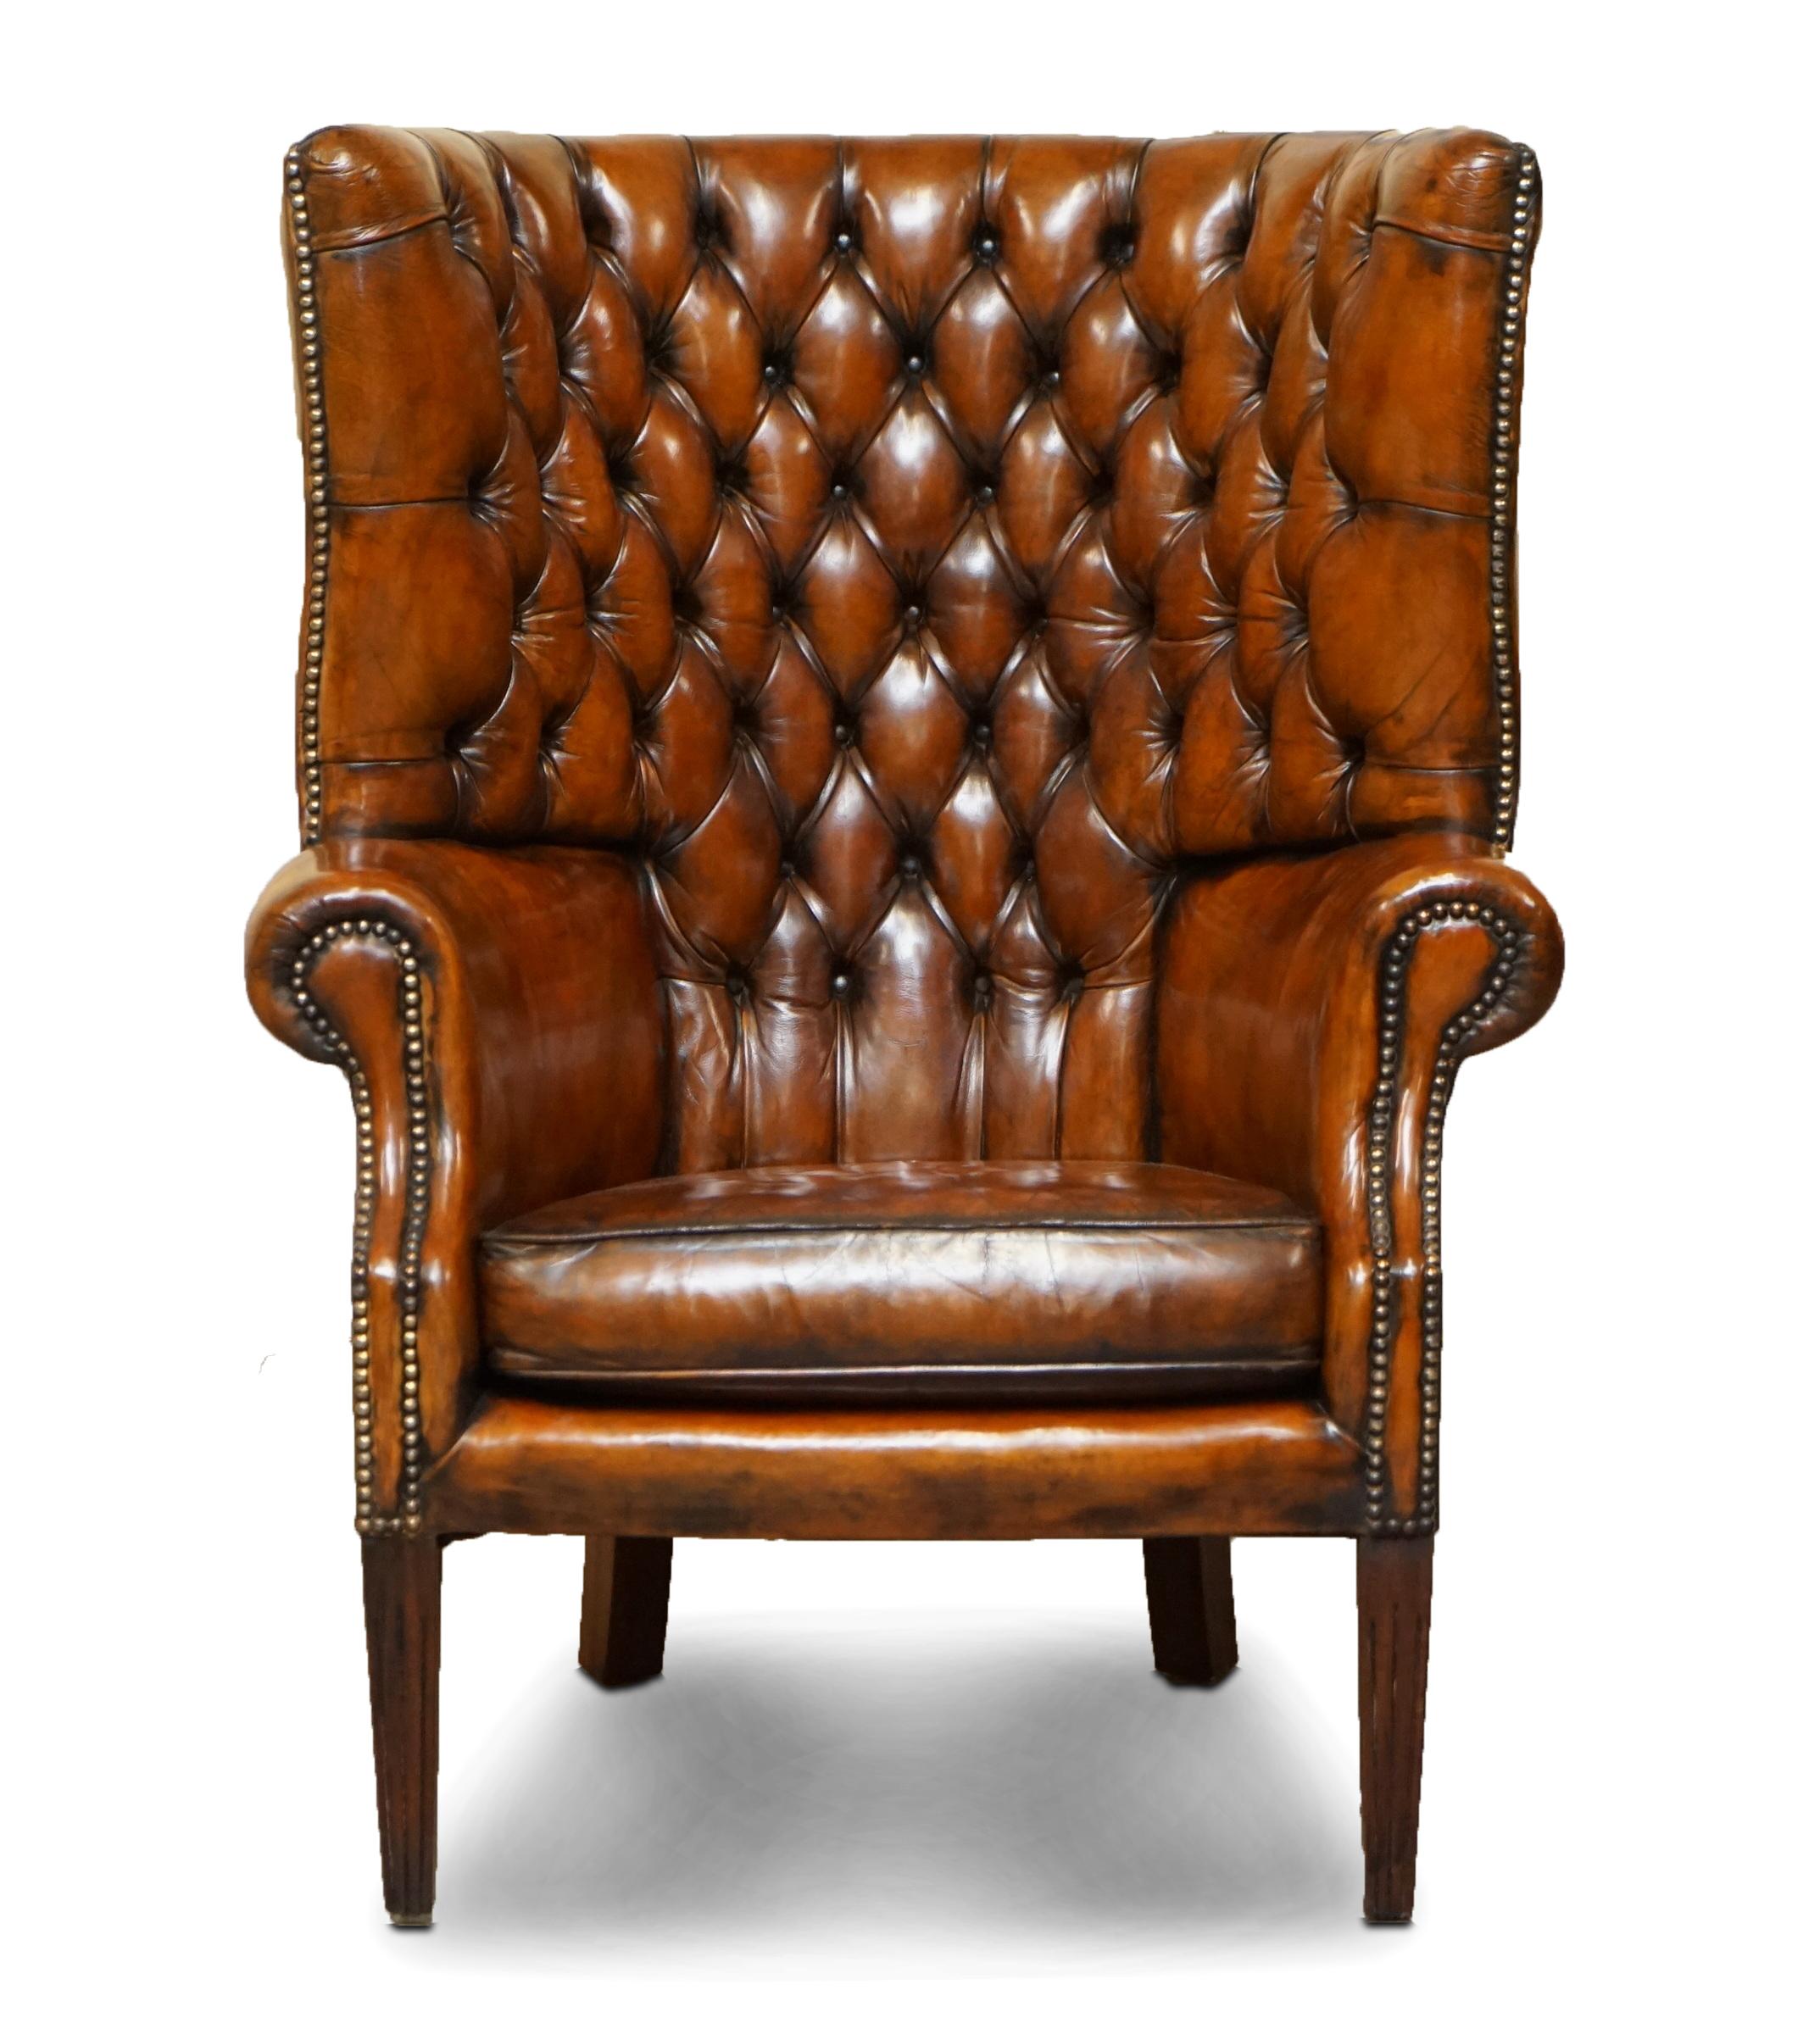 We are delighted to offer for sale this stunning late Victorian Porters barrel back armchair in whisky brown leather 

This chair a real tour de force, is has absolutely everything going for it, the leather hide is original and hand dyed from new,